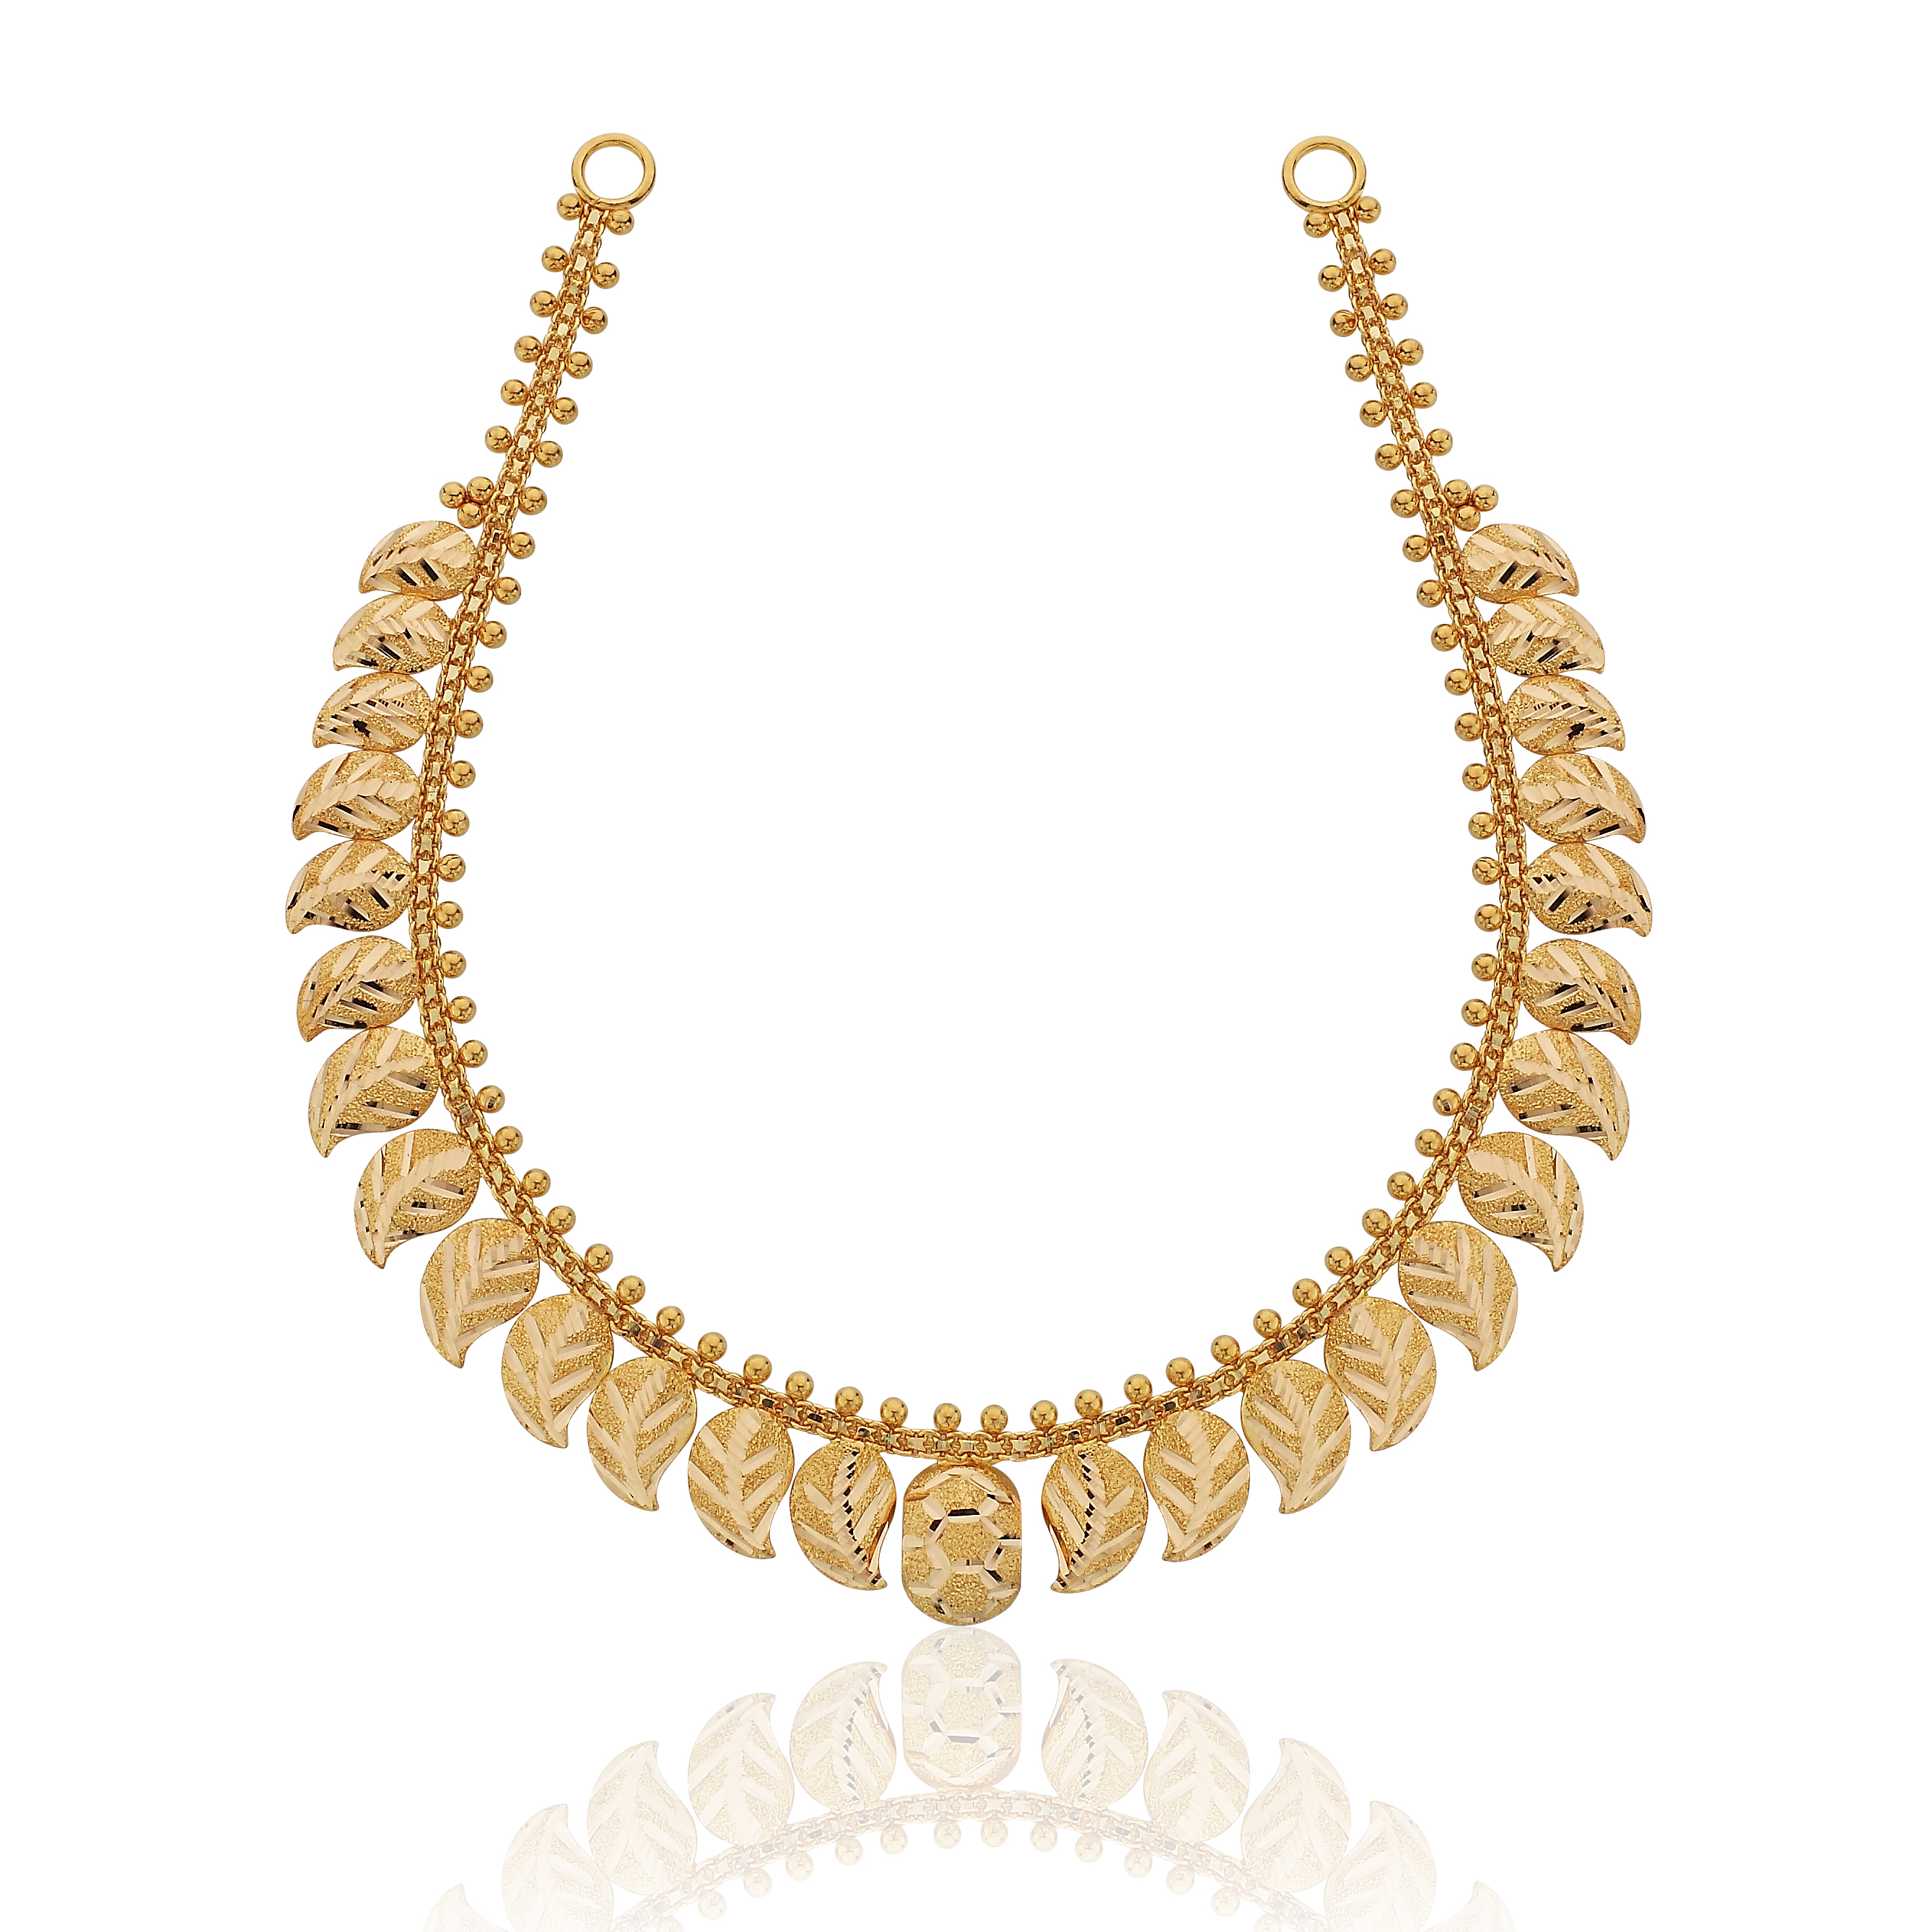 Aamrapali Gold Necklace at Karatcraft.in